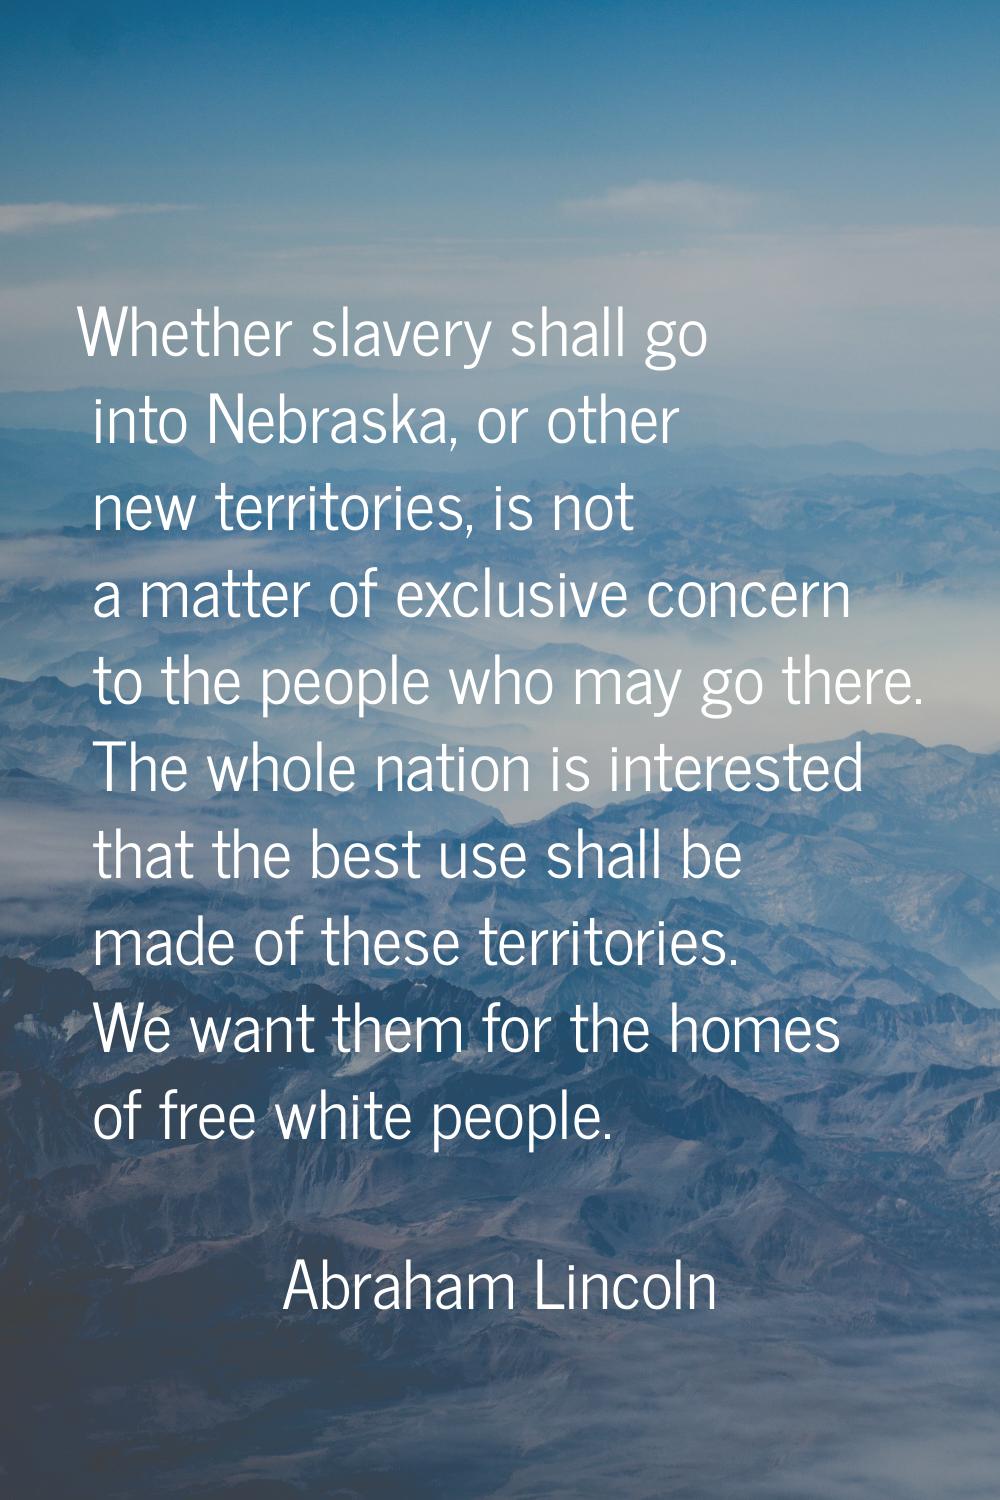 Whether slavery shall go into Nebraska, or other new territories, is not a matter of exclusive conc